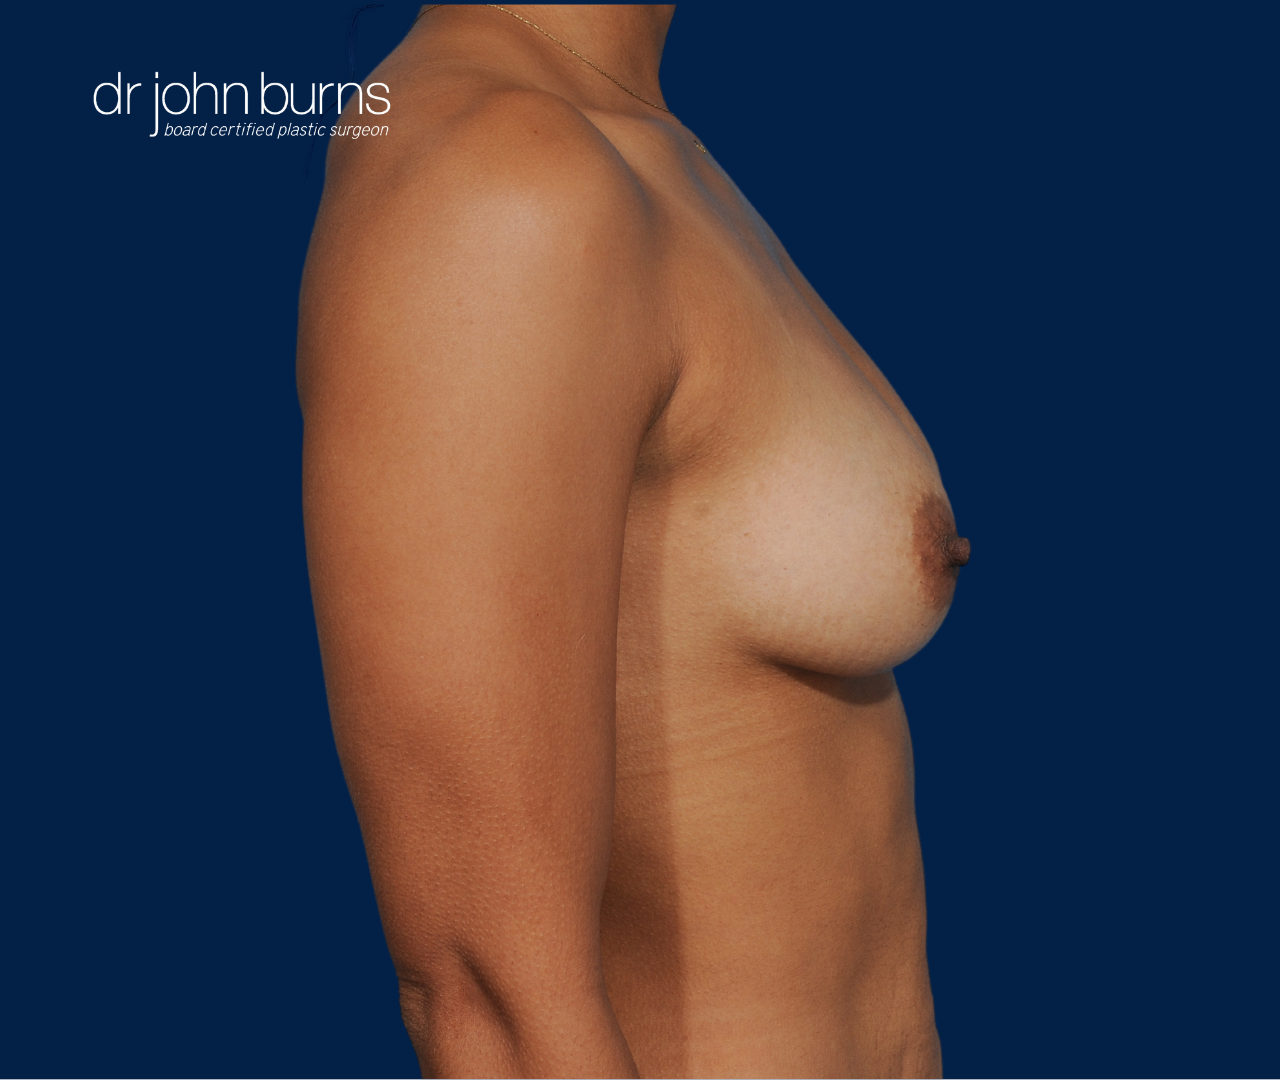 case 9- profile view | after fat transfer to breast by top plastic surgeon, Dr. John Burns